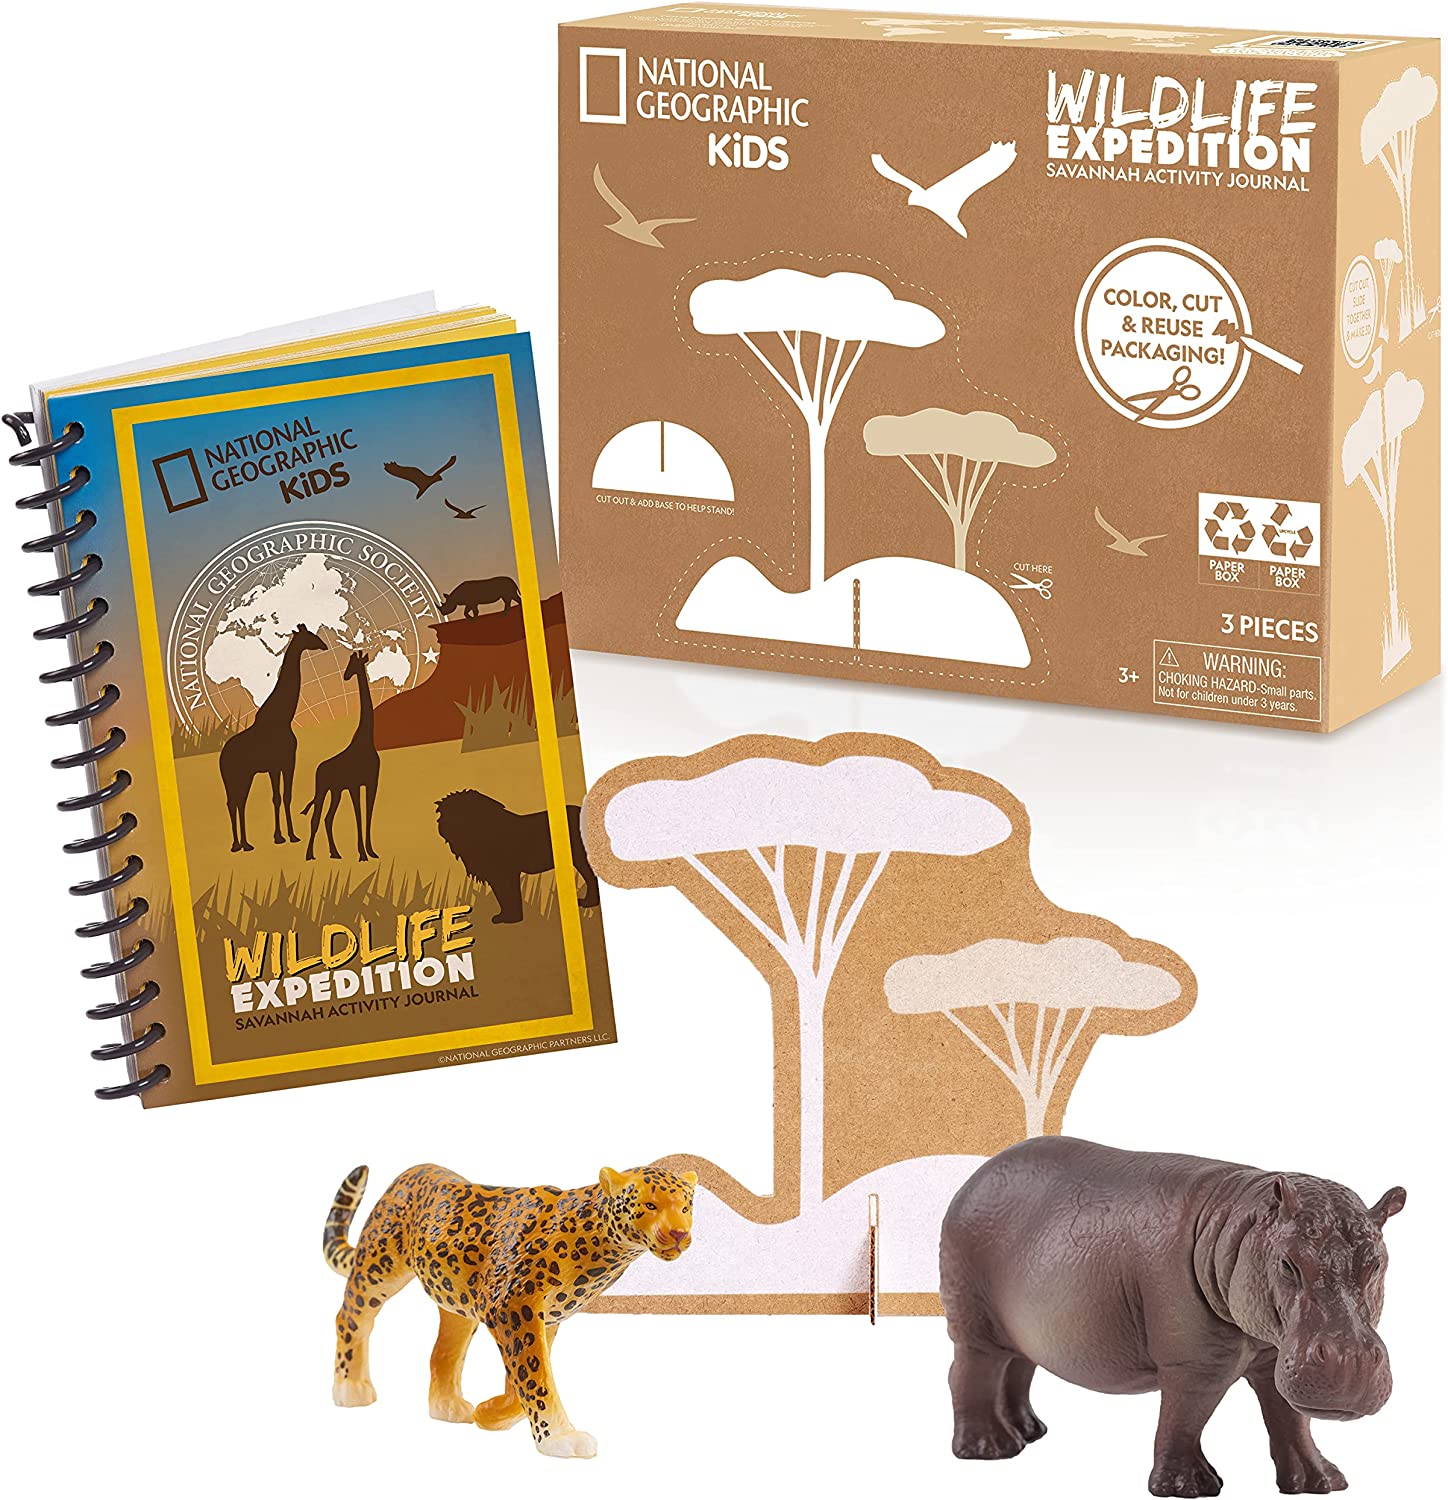 Just Play National Geographic Kids' Animal Facts & Activity Journal Book w/ Animal Toy Figures $5.95 + Free Shipping w/ Prime or on $25+